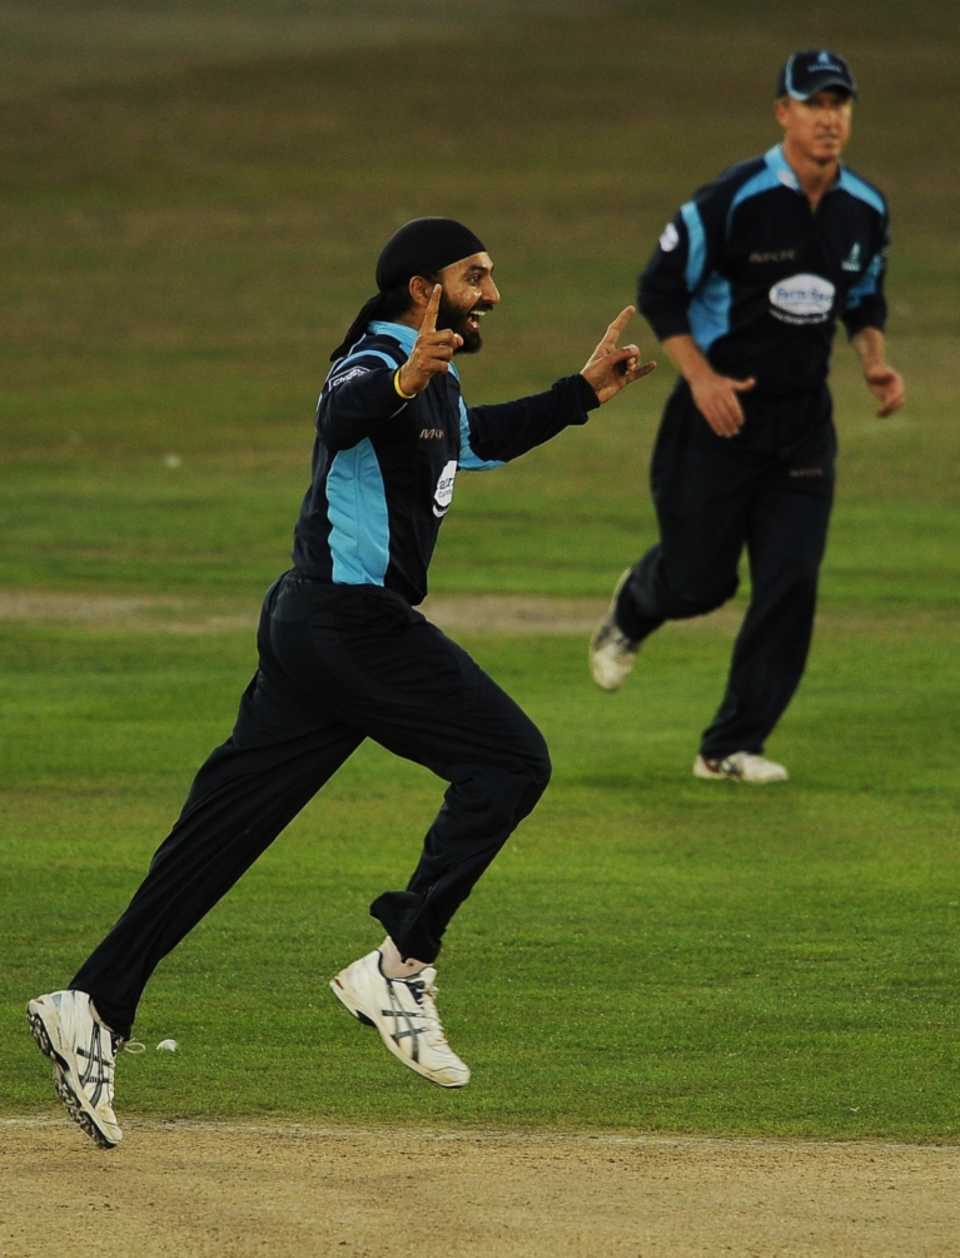 Monty Panesar was the best bowler on either side, finishing with 2 for 11 from eight overs